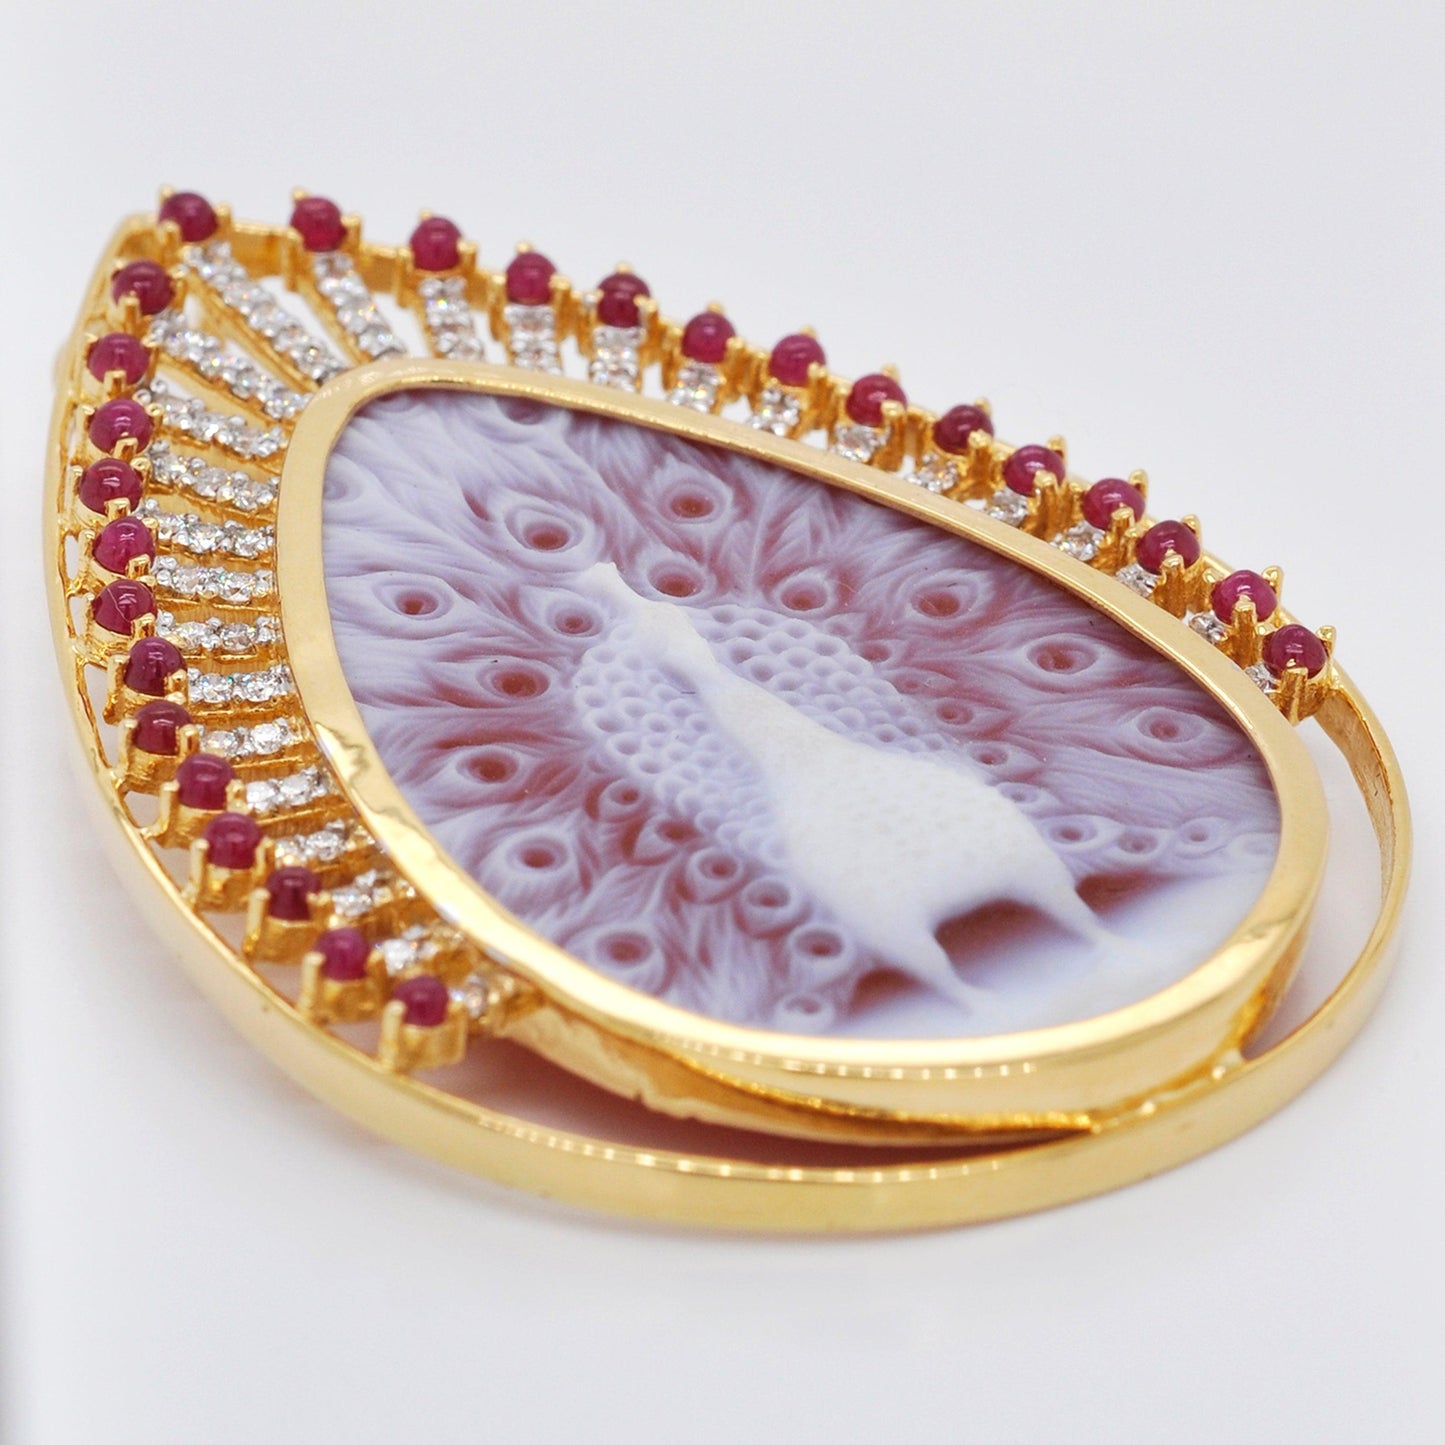 Cameo Pendant with Peacock Agate, Ruby, and Diamonds